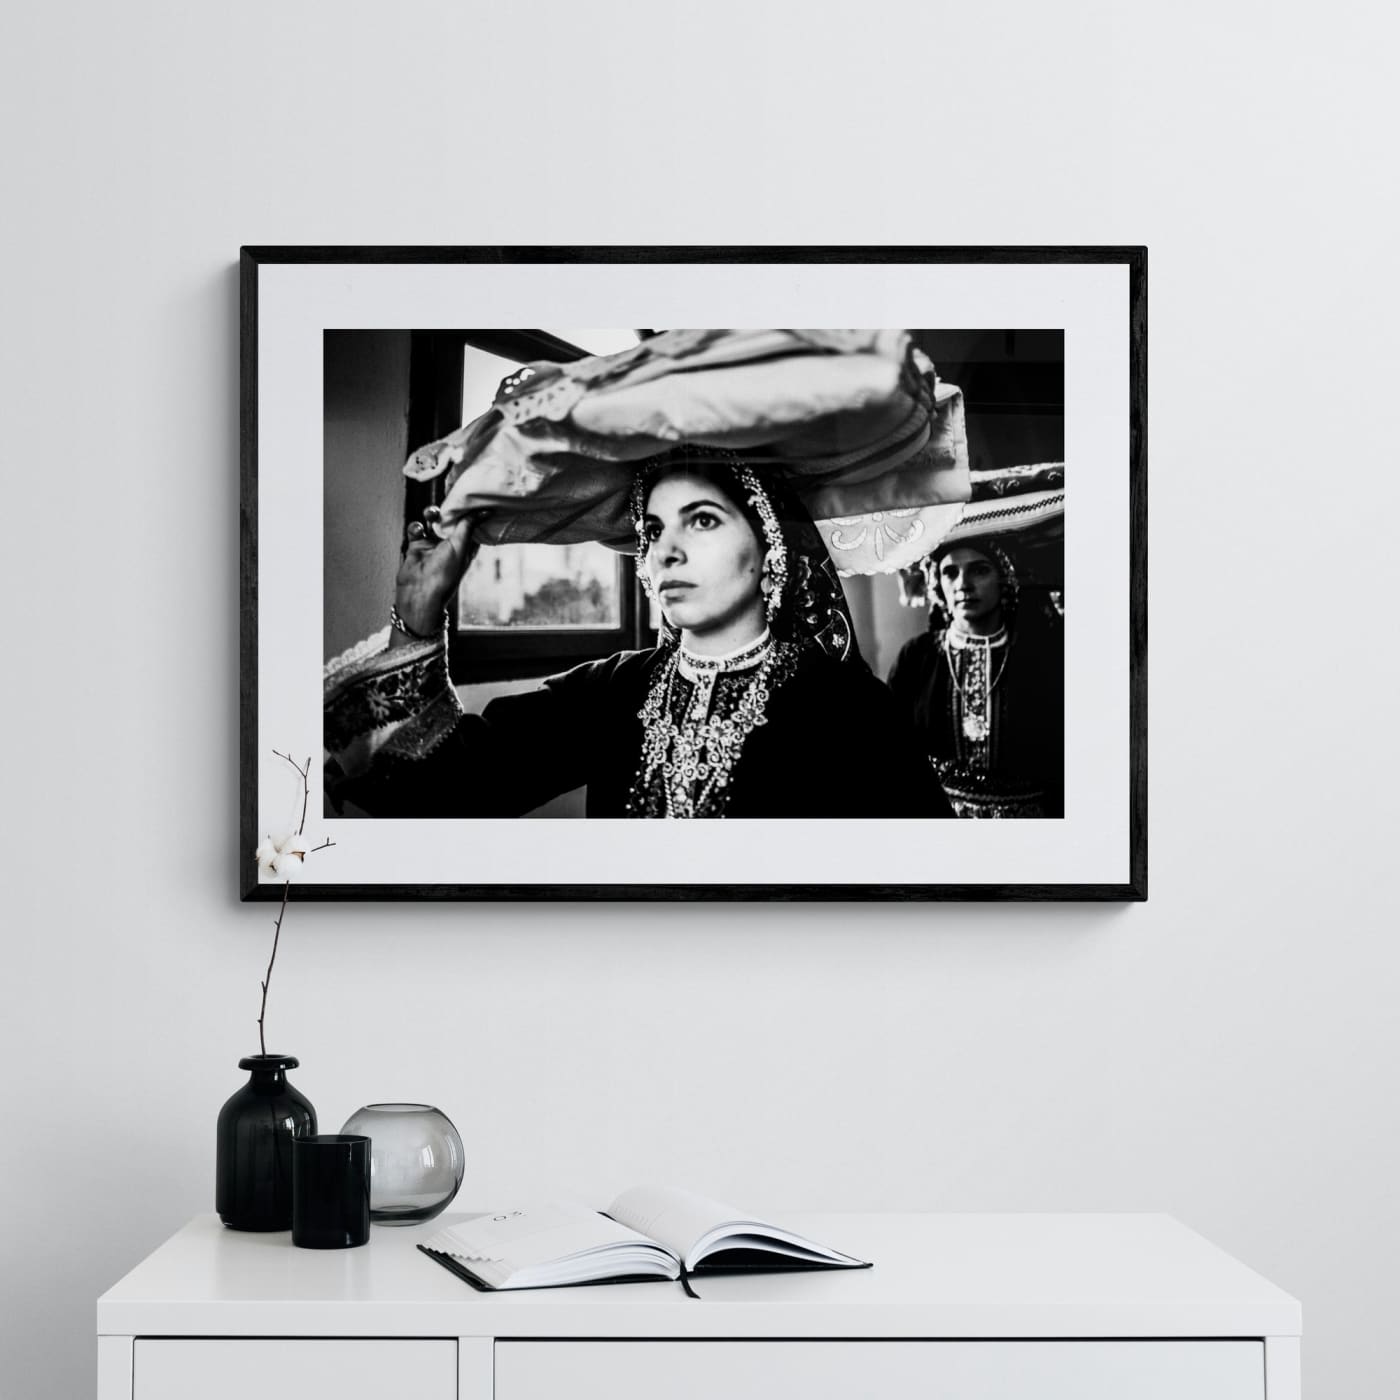 Black and White Photography Wall Art Greece | Dowry arriving at Diafani Olympos Karpathos Dodecanese by George Tatakis - single framed photo